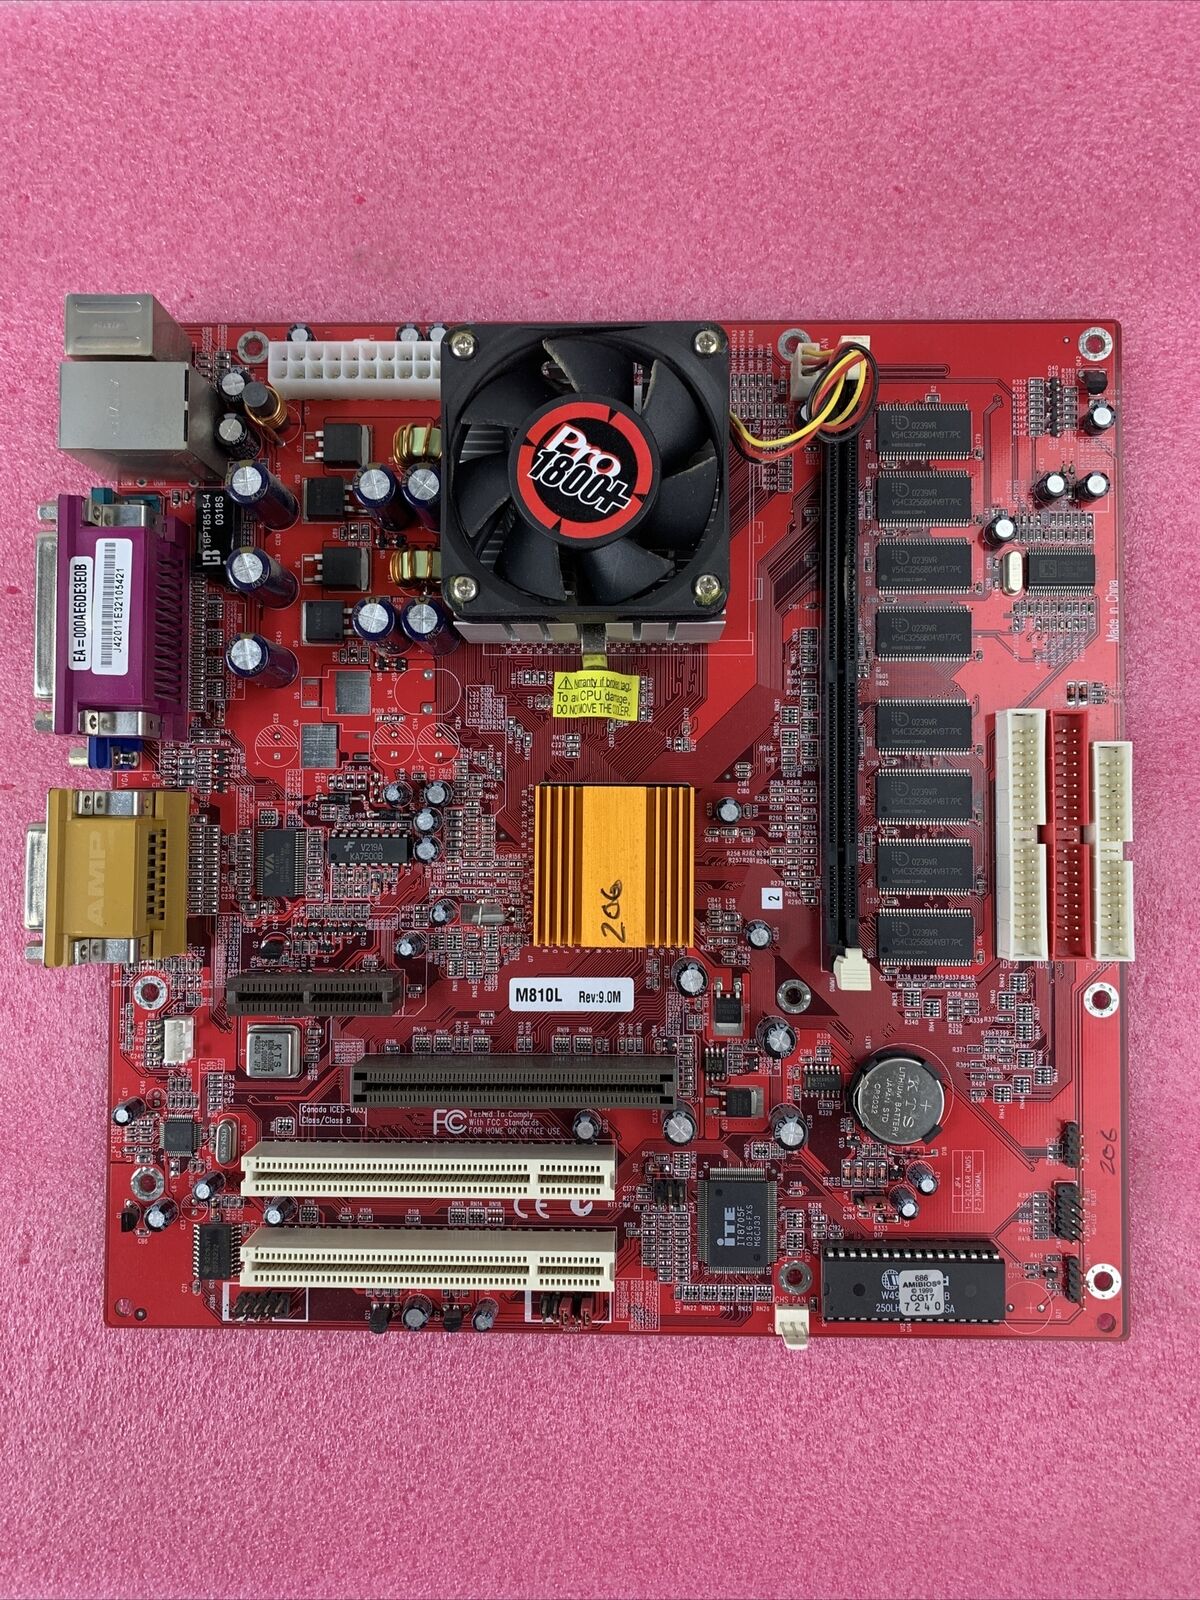 PC Chips M810L Motherboard AMD Duron 1.26GHz 256MB RAM